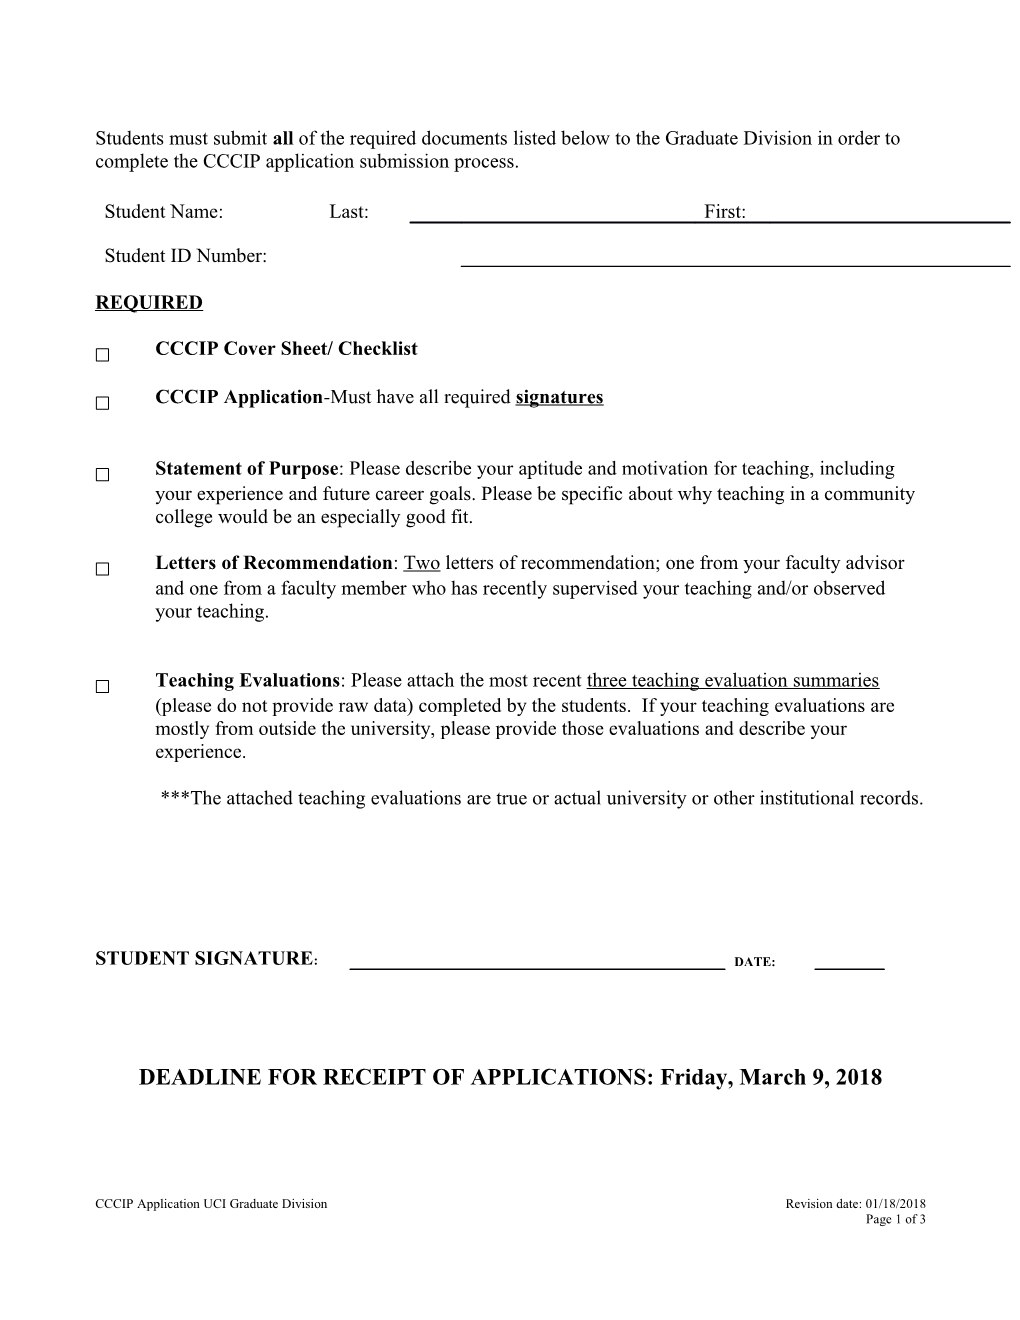 CCCIP Application-Must Have All Required Signatures